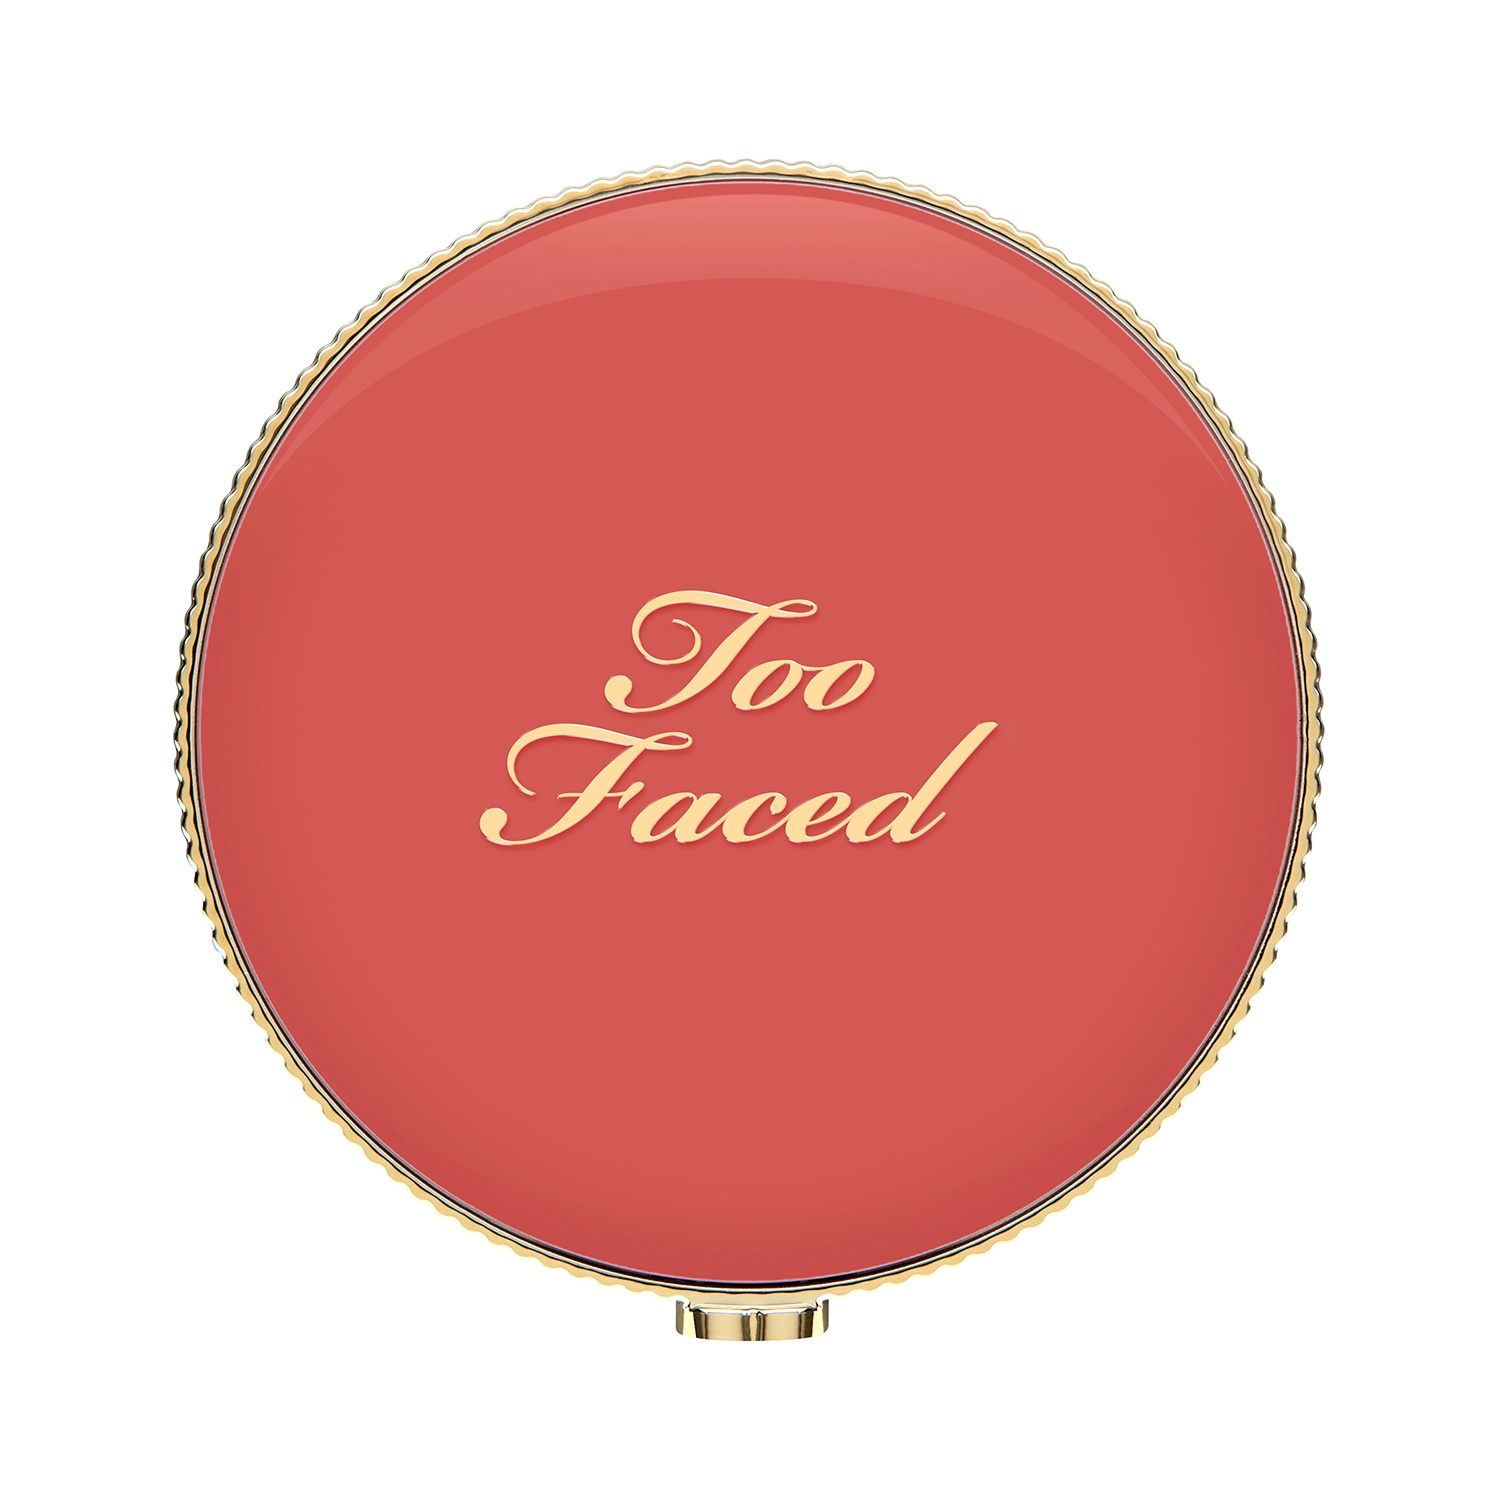 Too Faced | Too Faced Cloud Crush Blush - Tequila Sunset (4.8g)